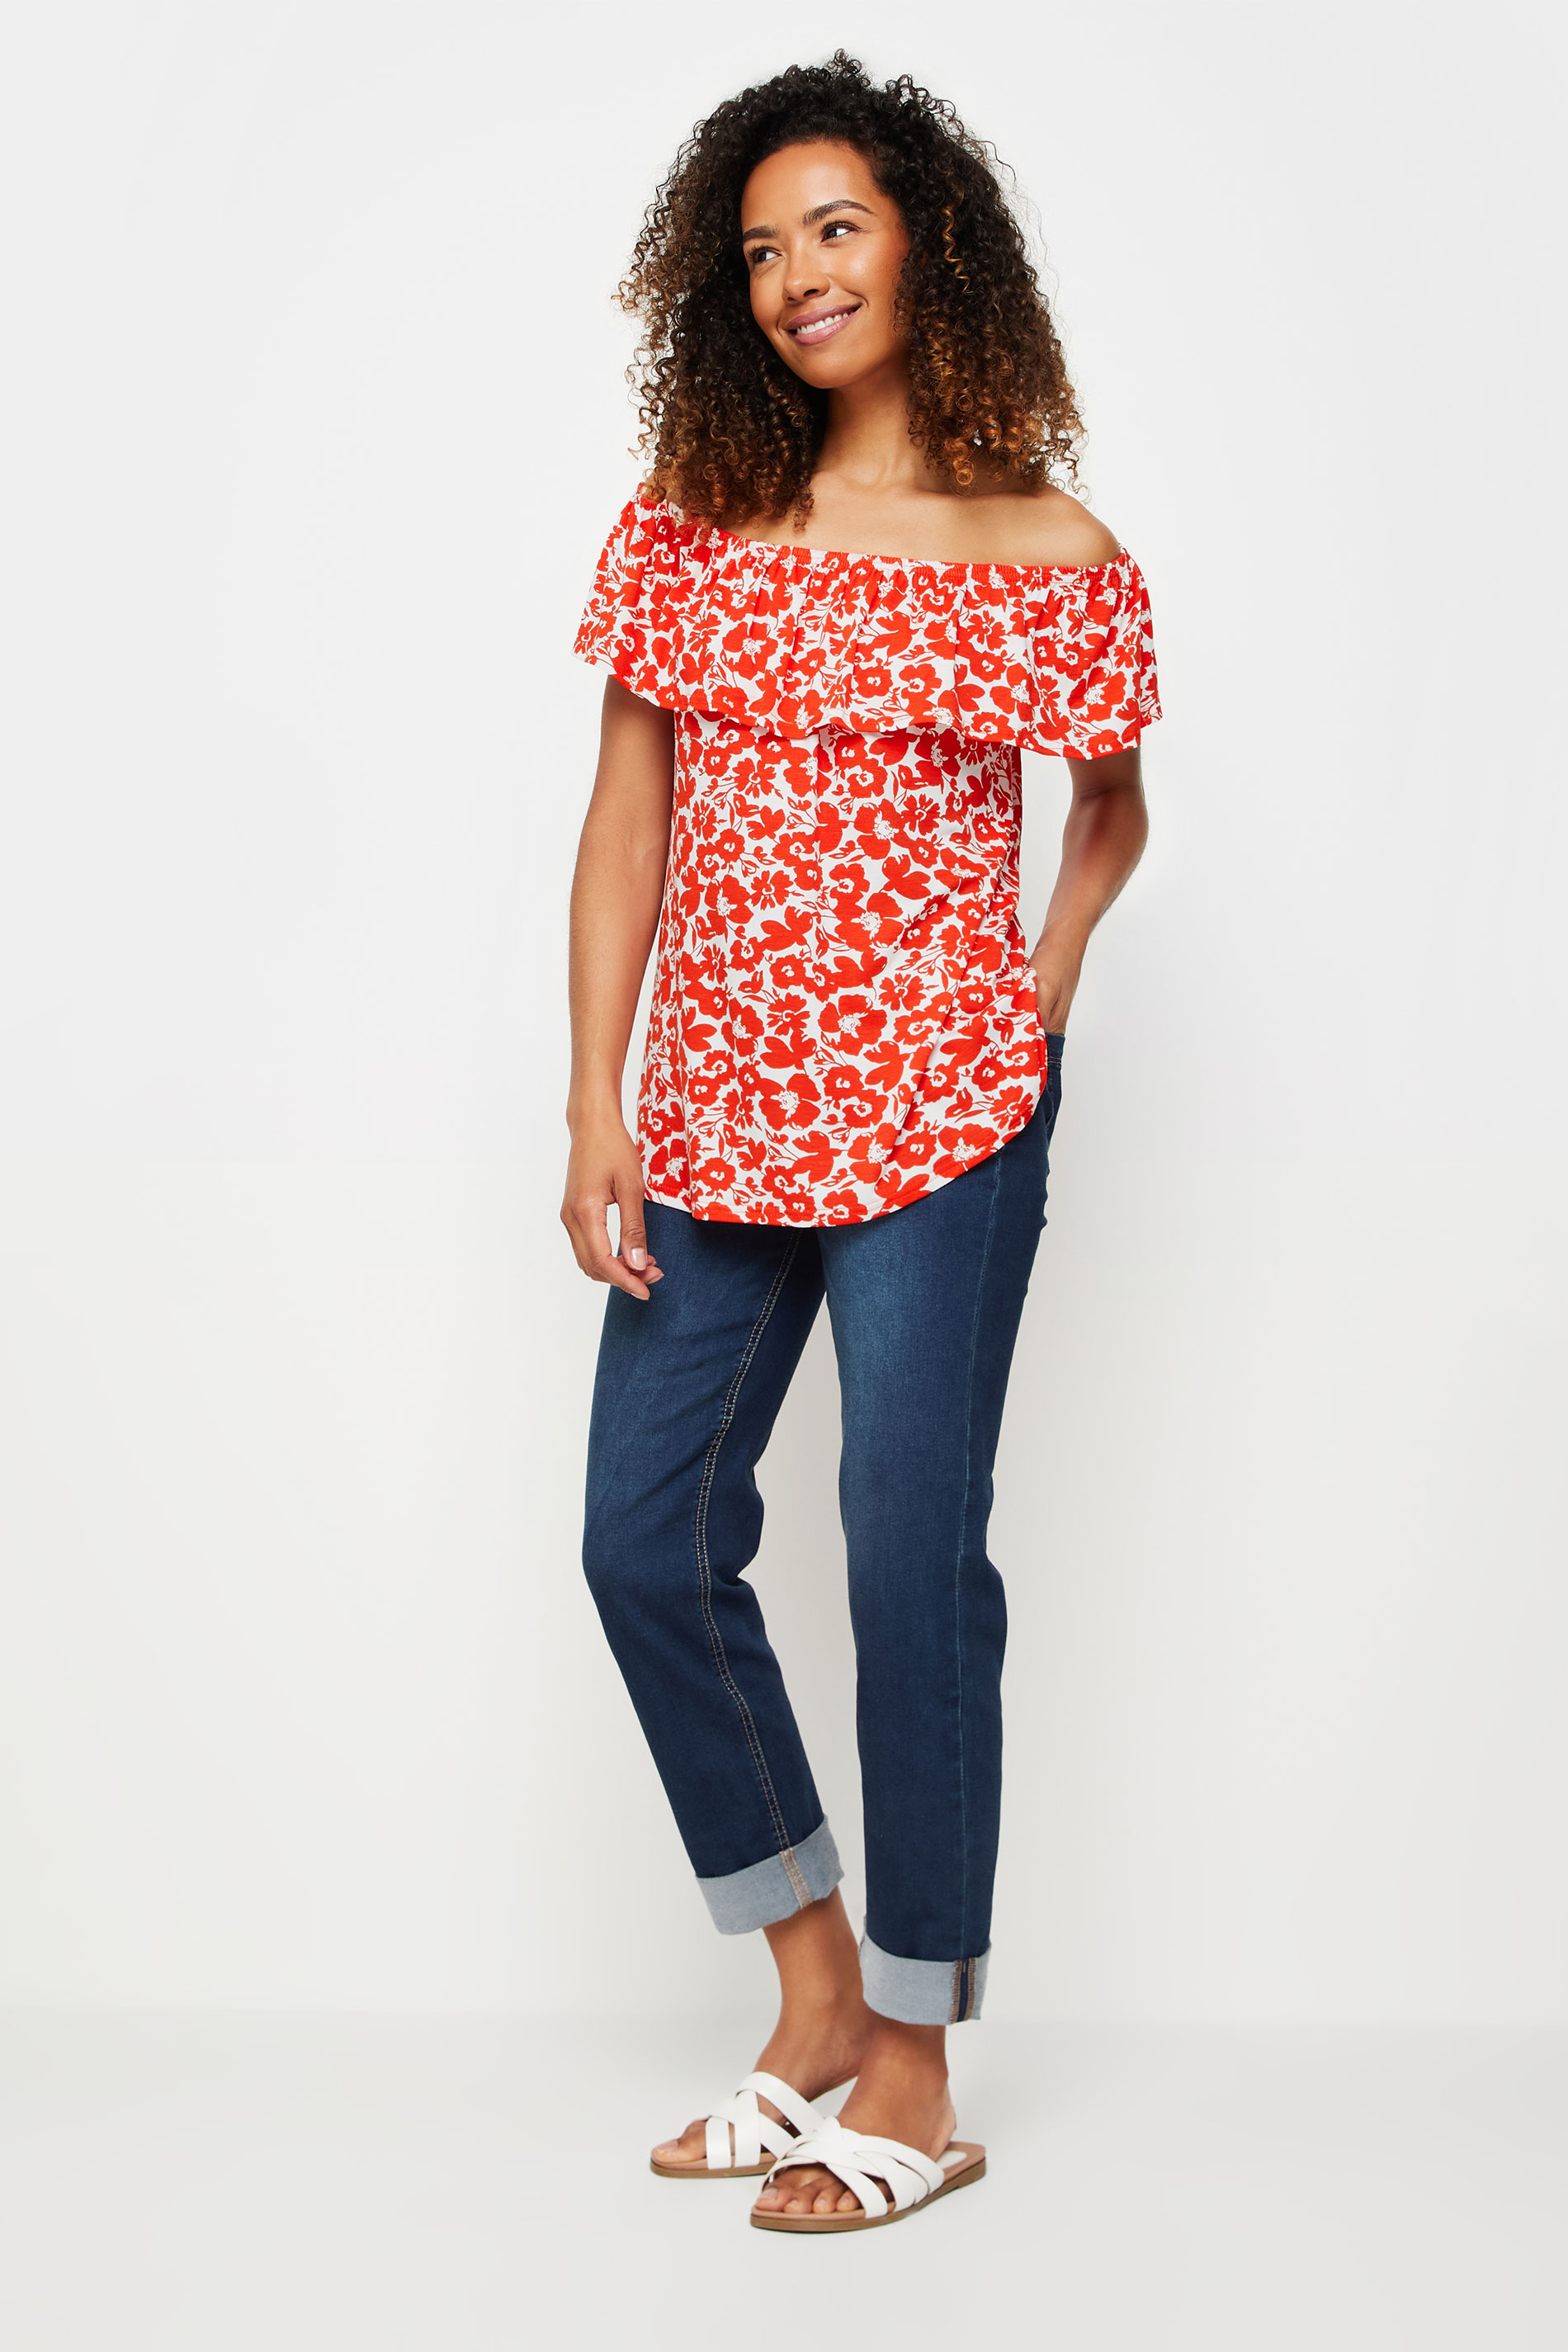 M&Co Red & Ivory Flower Printed Bardot Top | M&Co 2